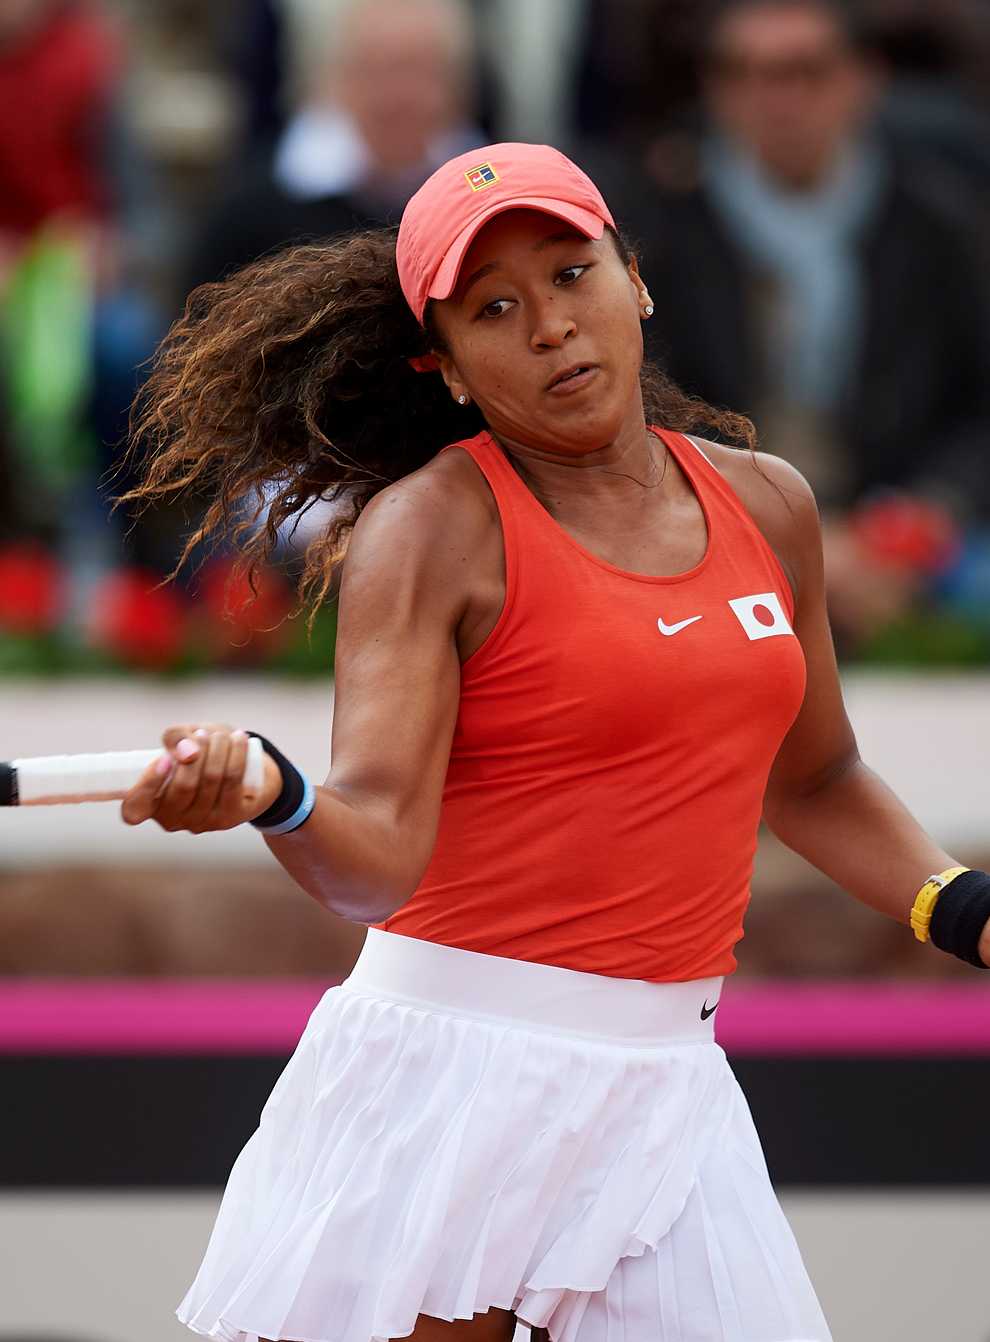  Naomi Osaka is due to battle for a spot in the final at the Western & Southern Open